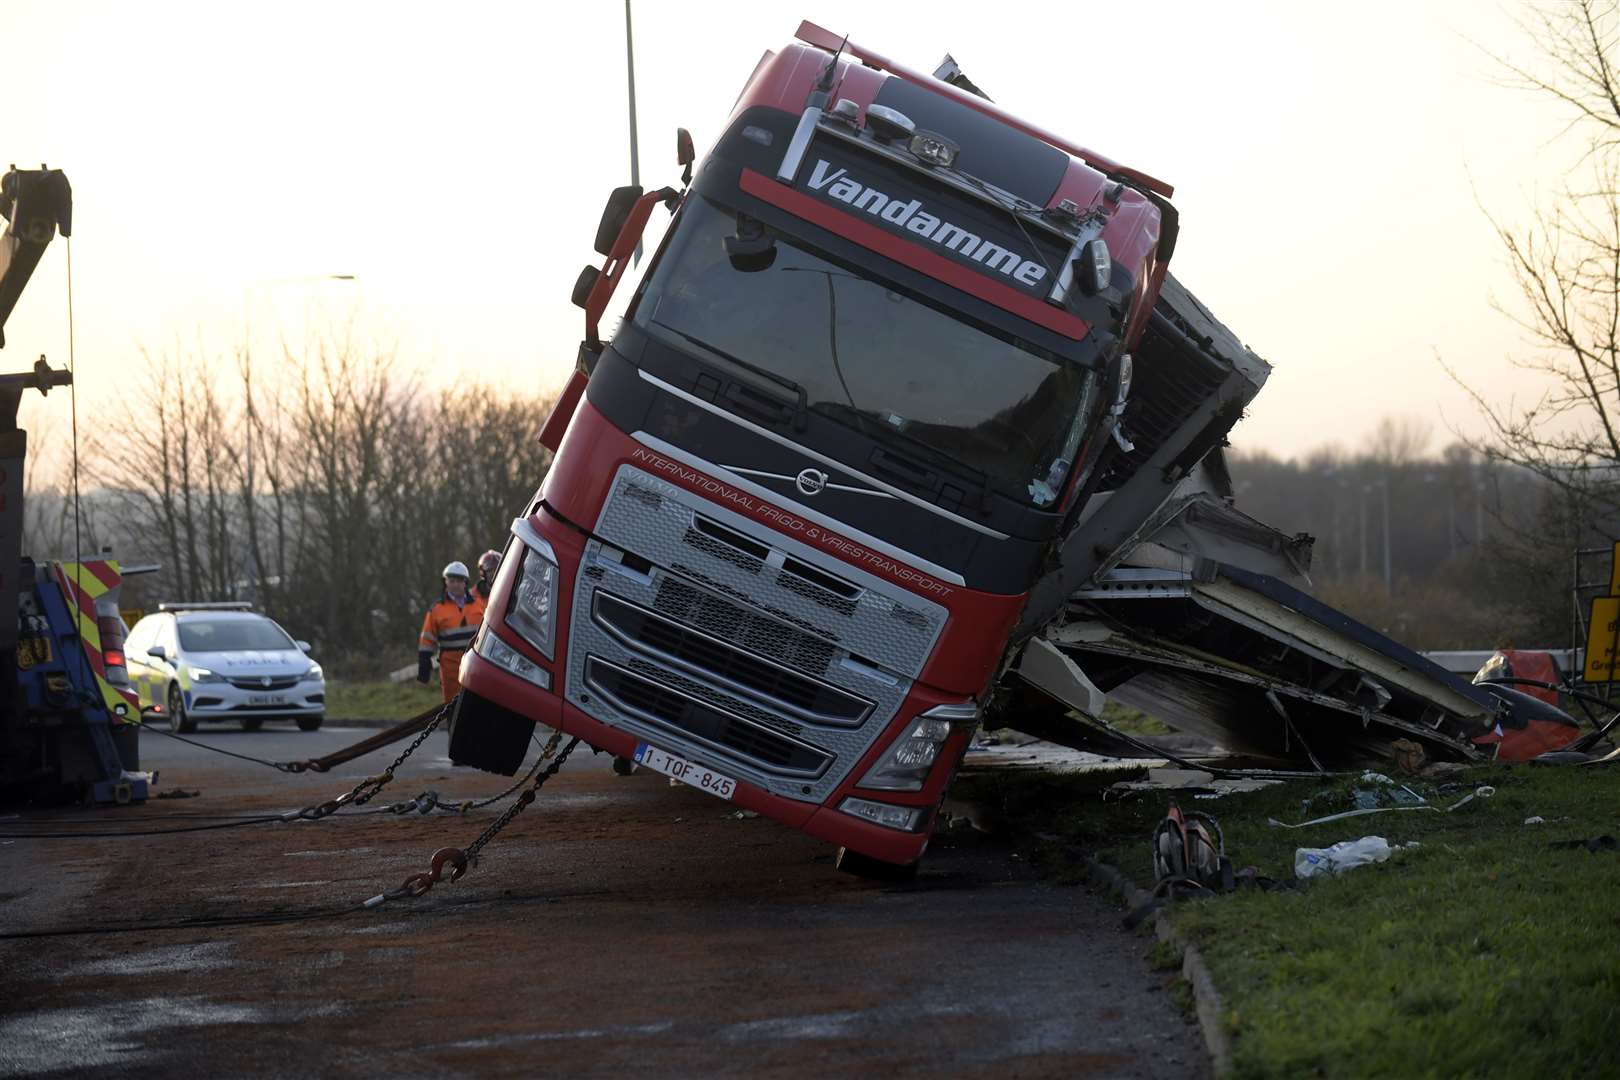 The lorry was finally lifted from its side after 12 hours. Picture: Barry Goodwin